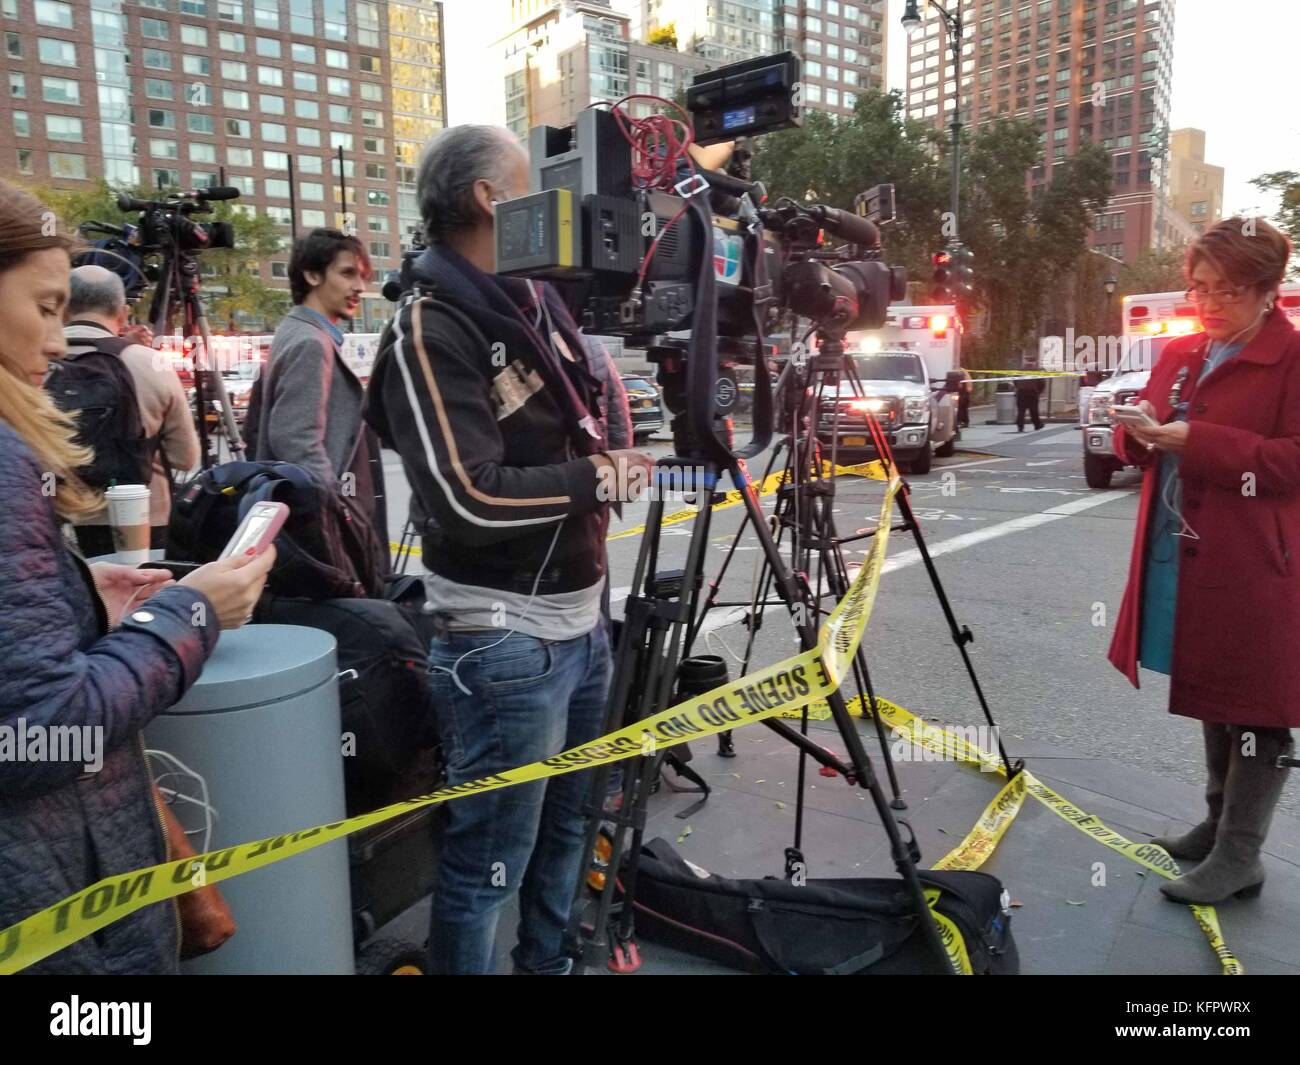 New York City, USA. 31st Oct, 2017. A news reporter gets ready to broadcast live at the scene of a terrorist attack near the World Trade Center in NYC. A driver kills several people in a rental truck in New York City, October 31, 2017. It has been reported suspect was caught alive by police after driving a rental truck on a popular bike path along the Hudson River in the Tribeca neighborhood. Credit: Brigette Supernova/Alamy Live News Stock Photo